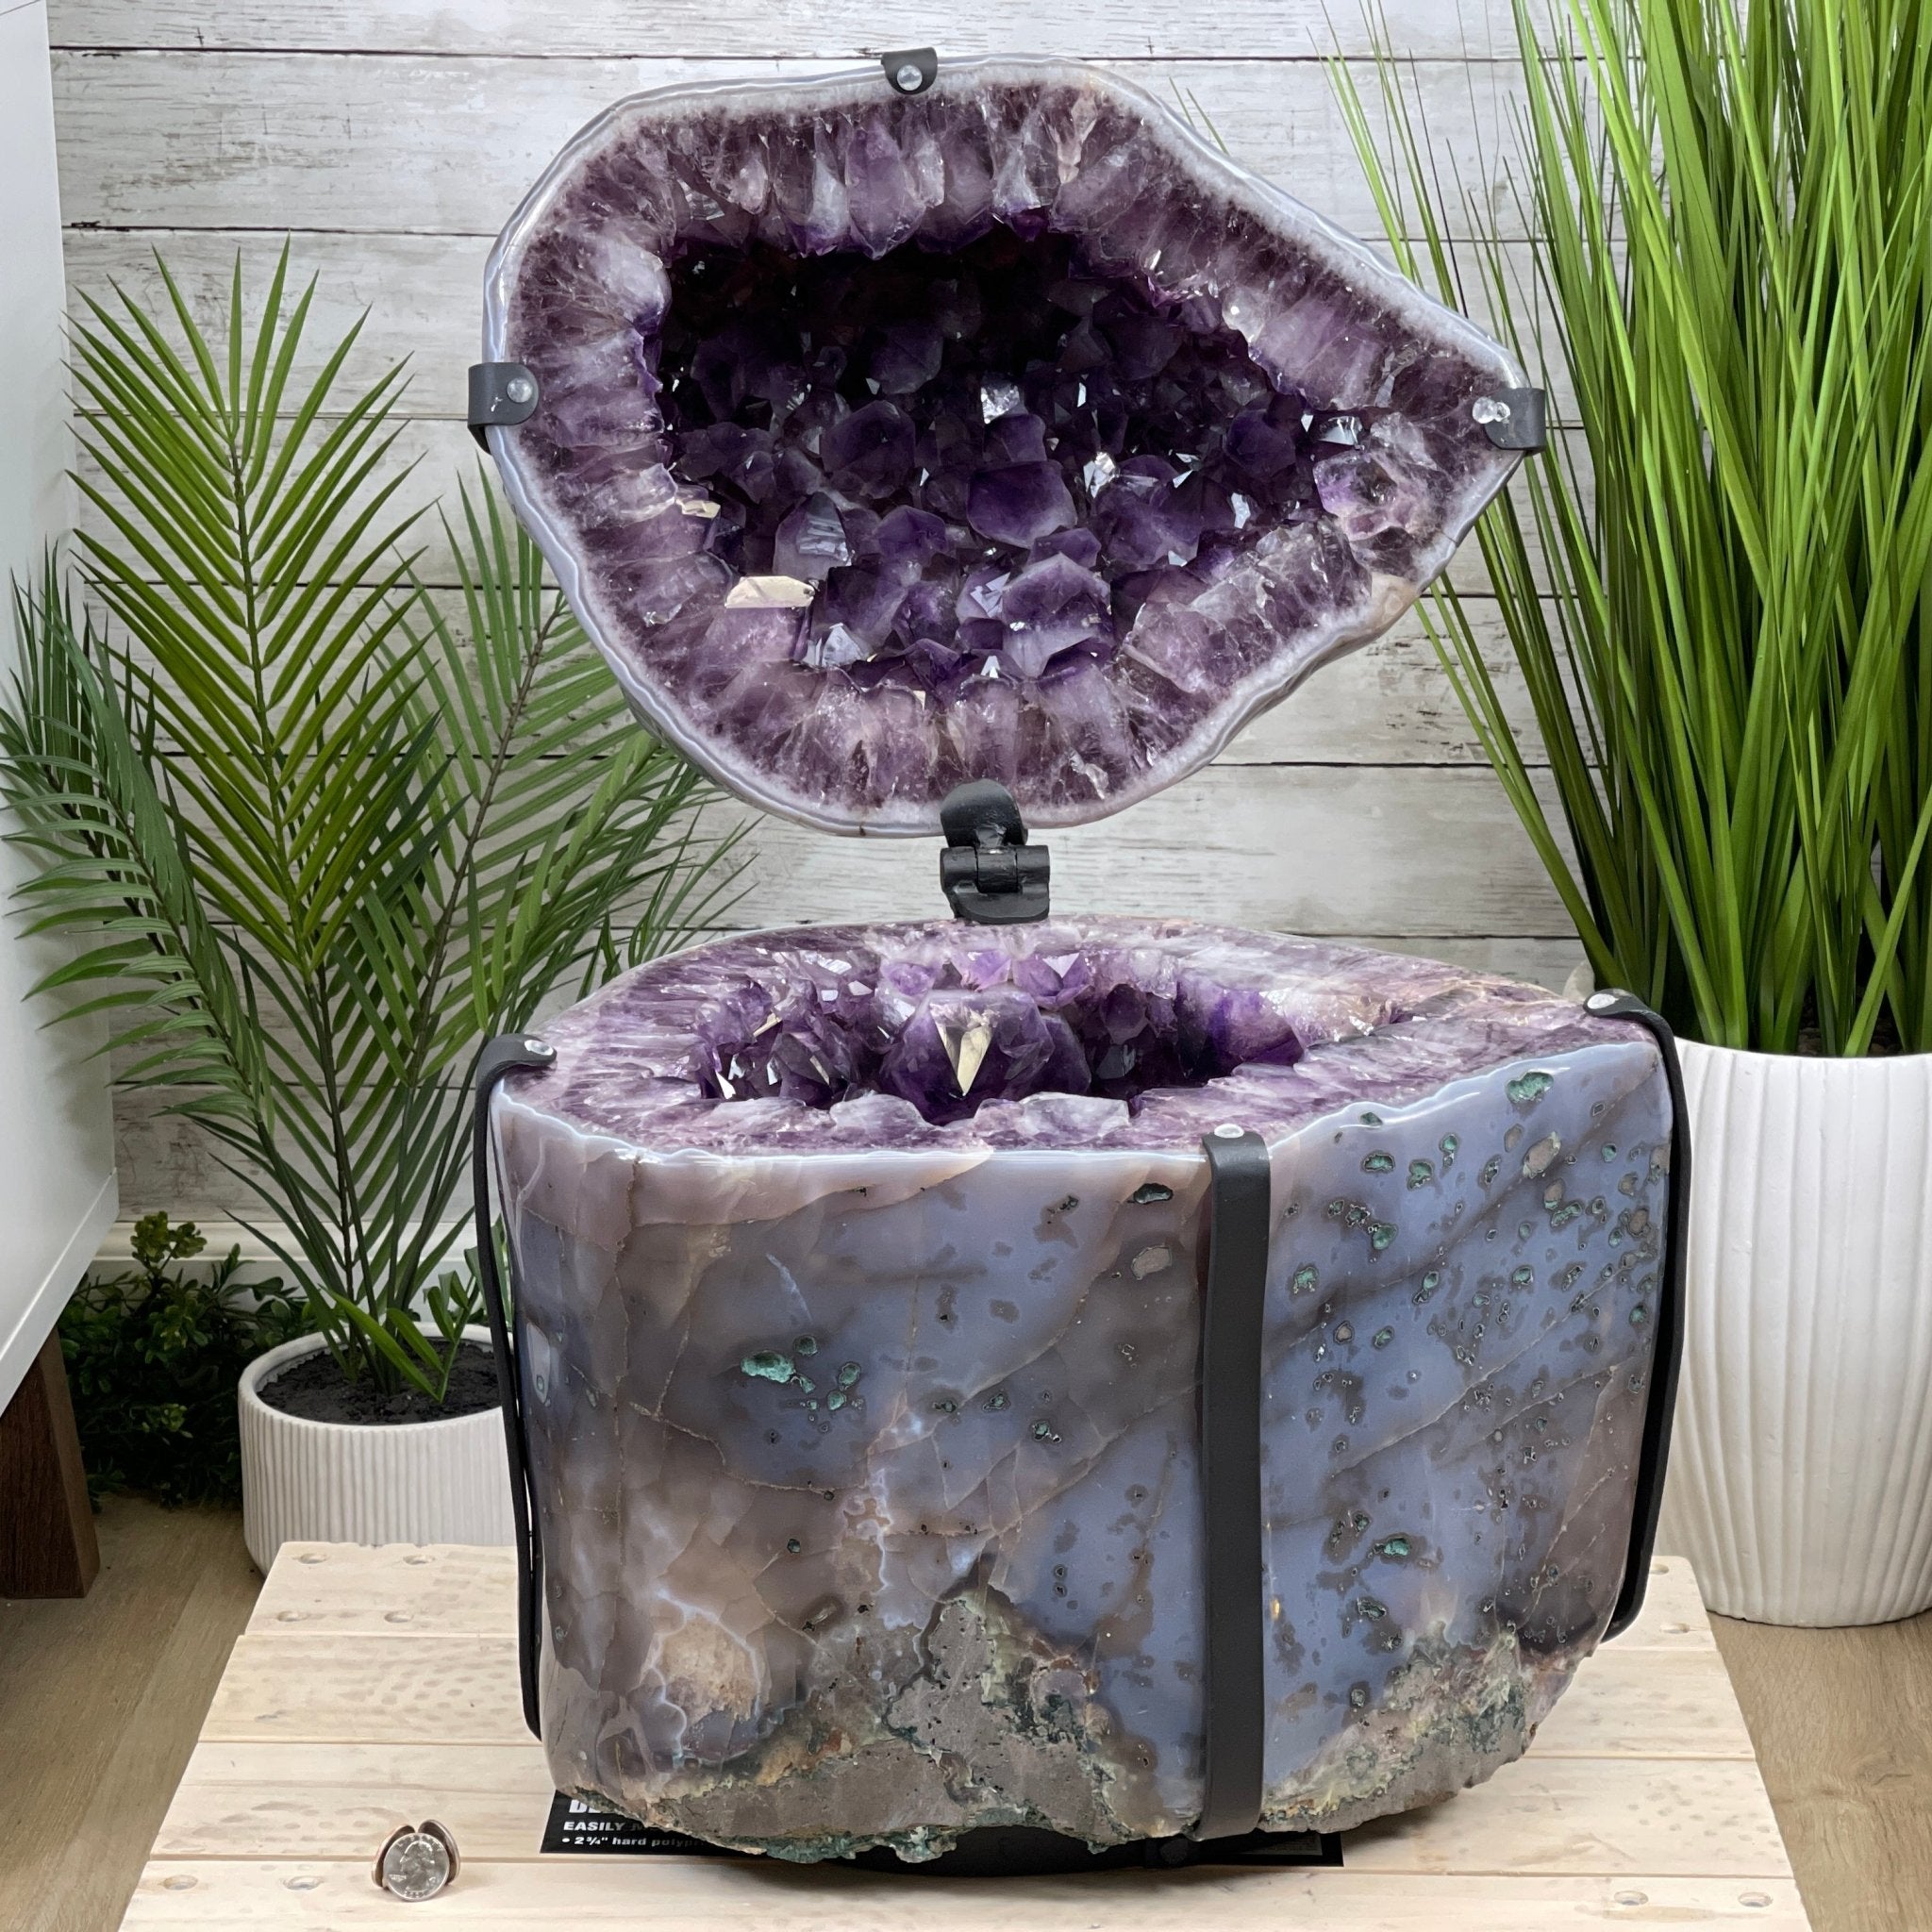 Super Quality Polished Amethyst "Jewelry Box", Clam Shell style Lid, 189.6 lbs & 25.5" tall, Model #5656-0008 by Brazil Gems - Brazil GemsBrazil GemsSuper Quality Polished Amethyst "Jewelry Box", Clam Shell style Lid, 189.6 lbs & 25.5" tall, Model #5656-0008 by Brazil GemsGeode Jewelry Boxes5656-0008